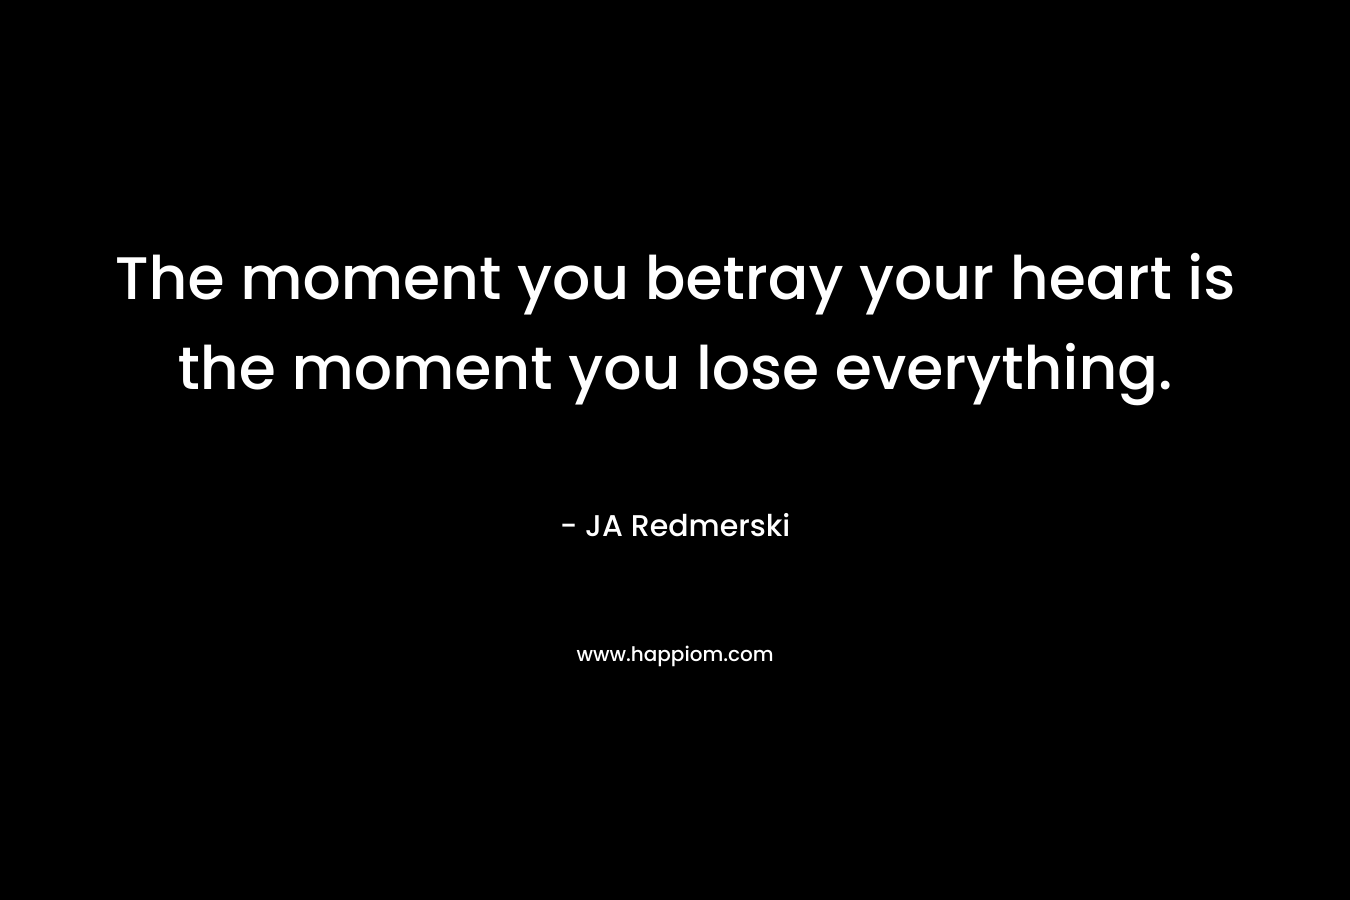 The moment you betray your heart is the moment you lose everything.